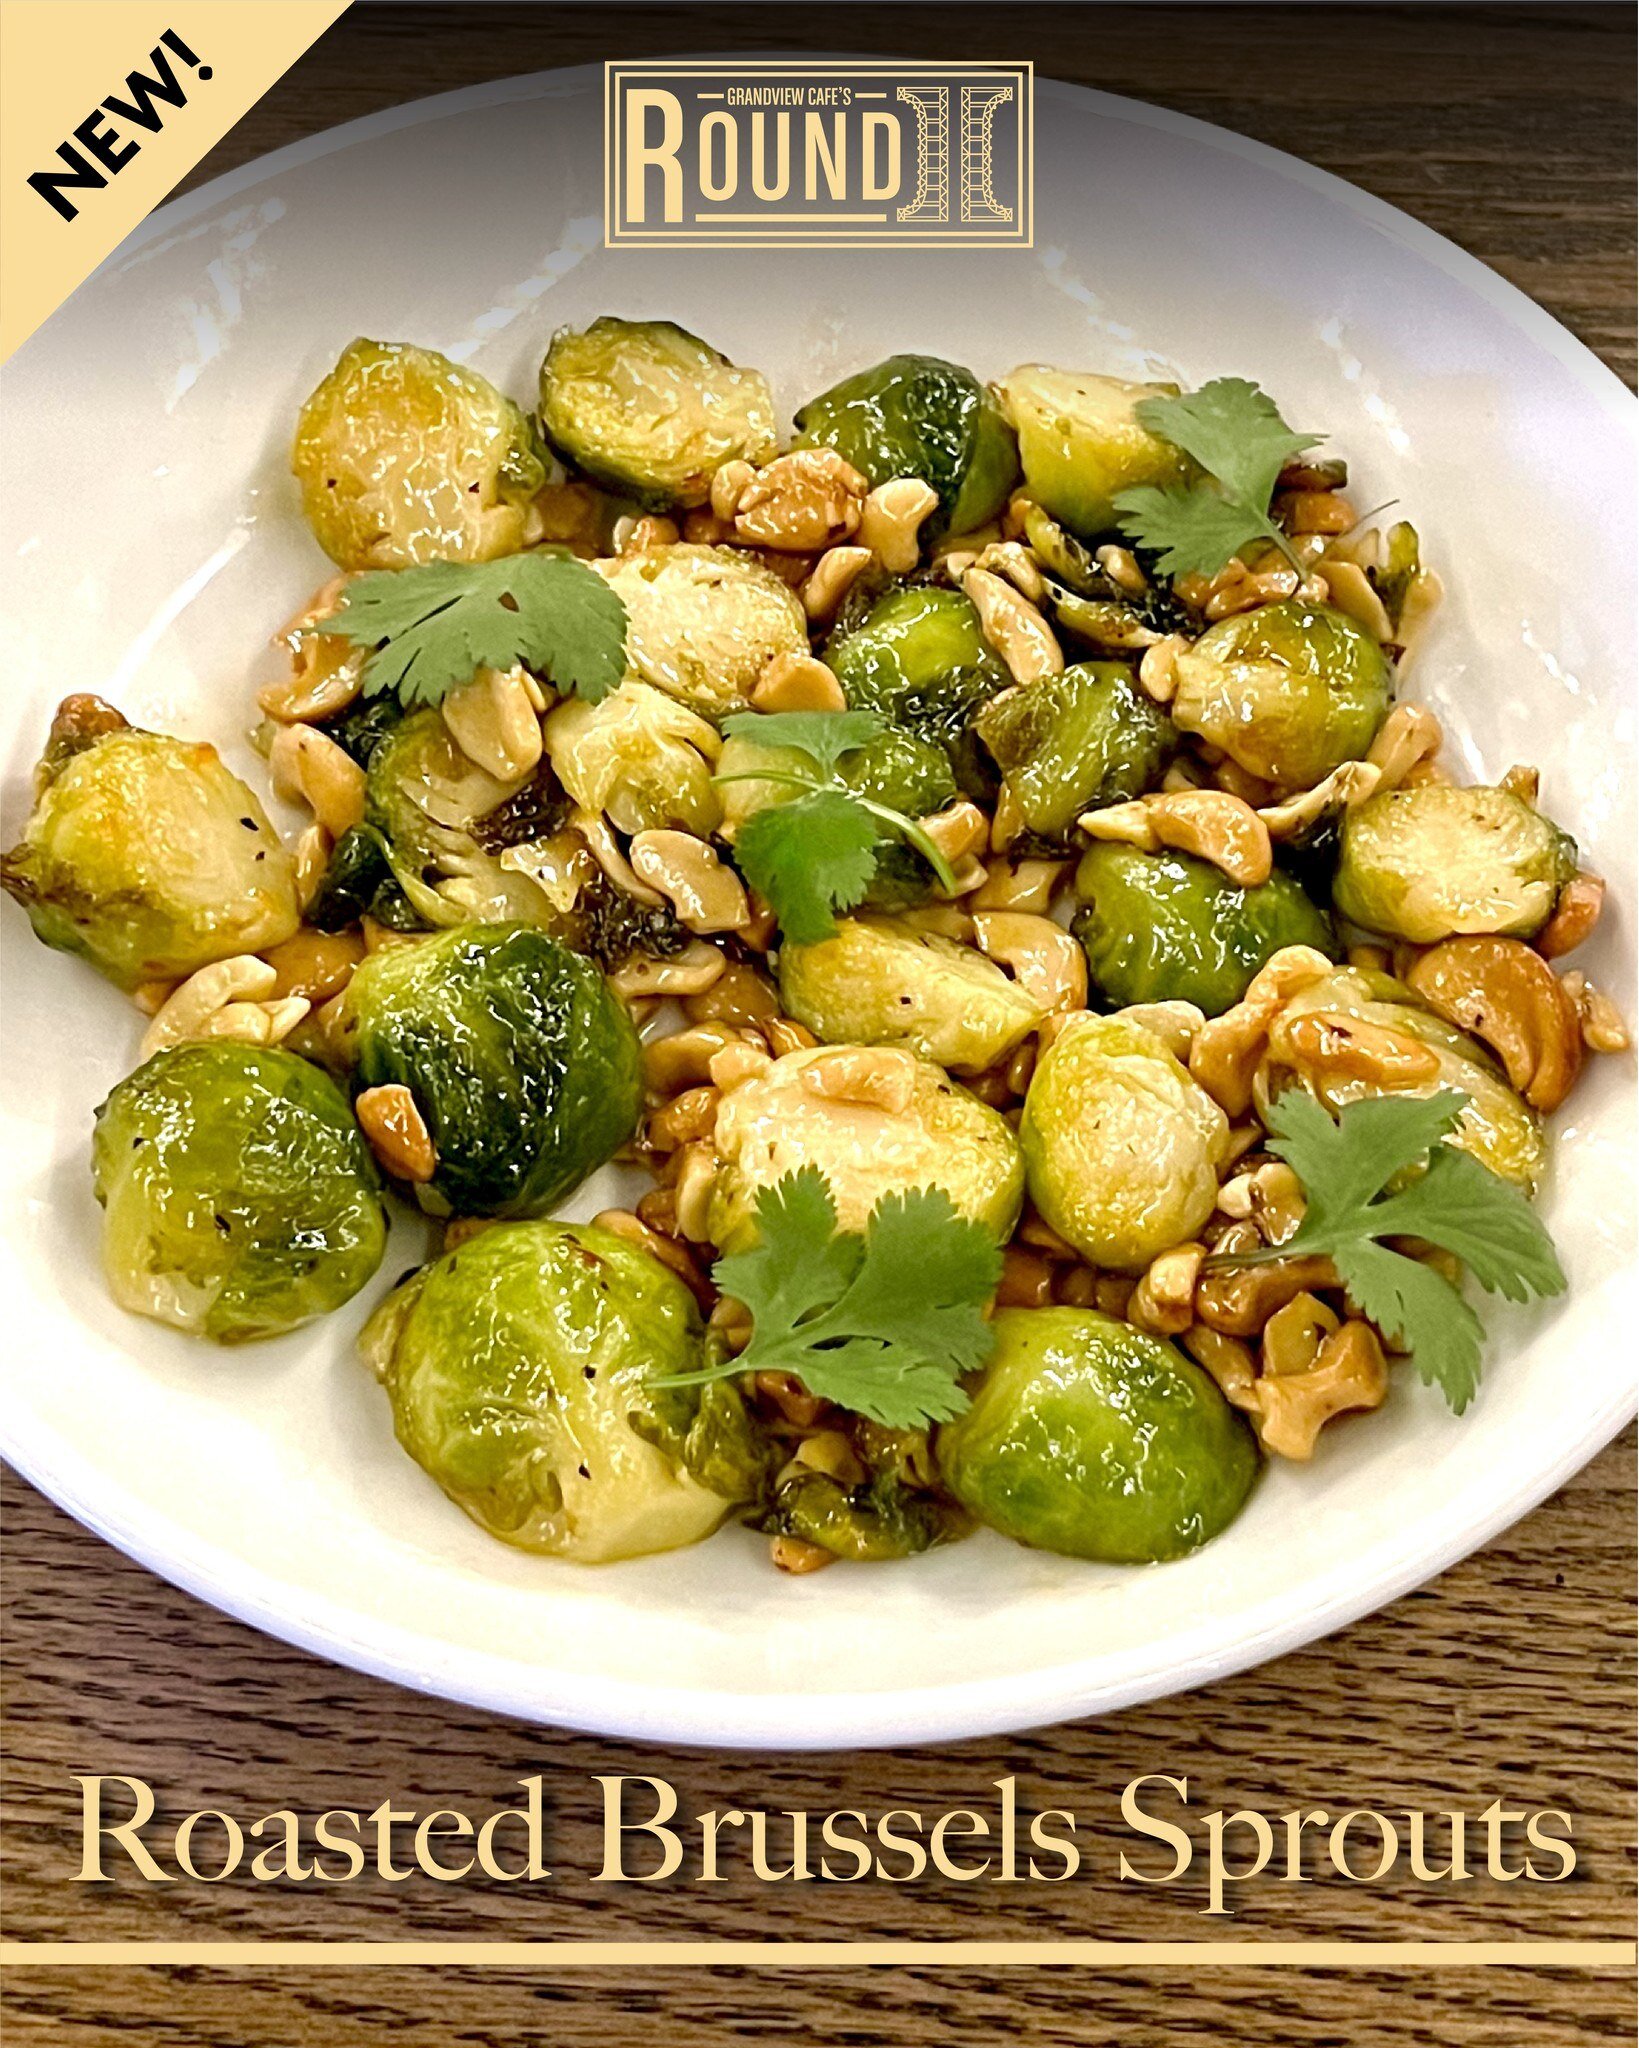 NEW: ROASTED BRUSSELS SPROUTS | Our amazing roasted Brussels Sprouts feature roasted sprouts with Thai sweet chile, toasted cashews &amp; cilantro. Perfect for sharing!

#newmenu #freshtake #comingsoon #cafesround2 #grandviewcafe #grandview #local #e